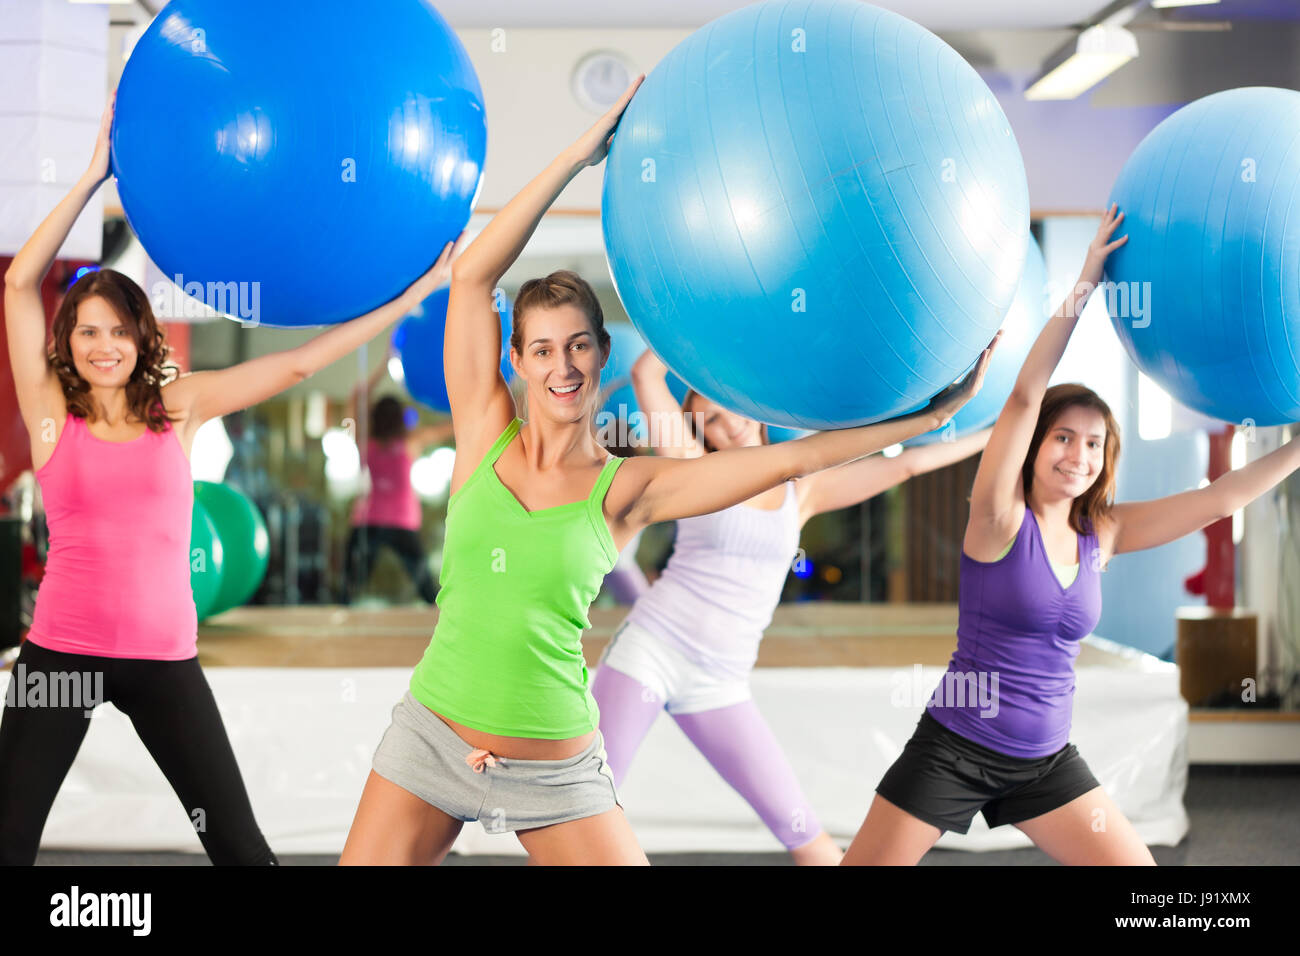 fitness - training and workout in the gym Stock Photo